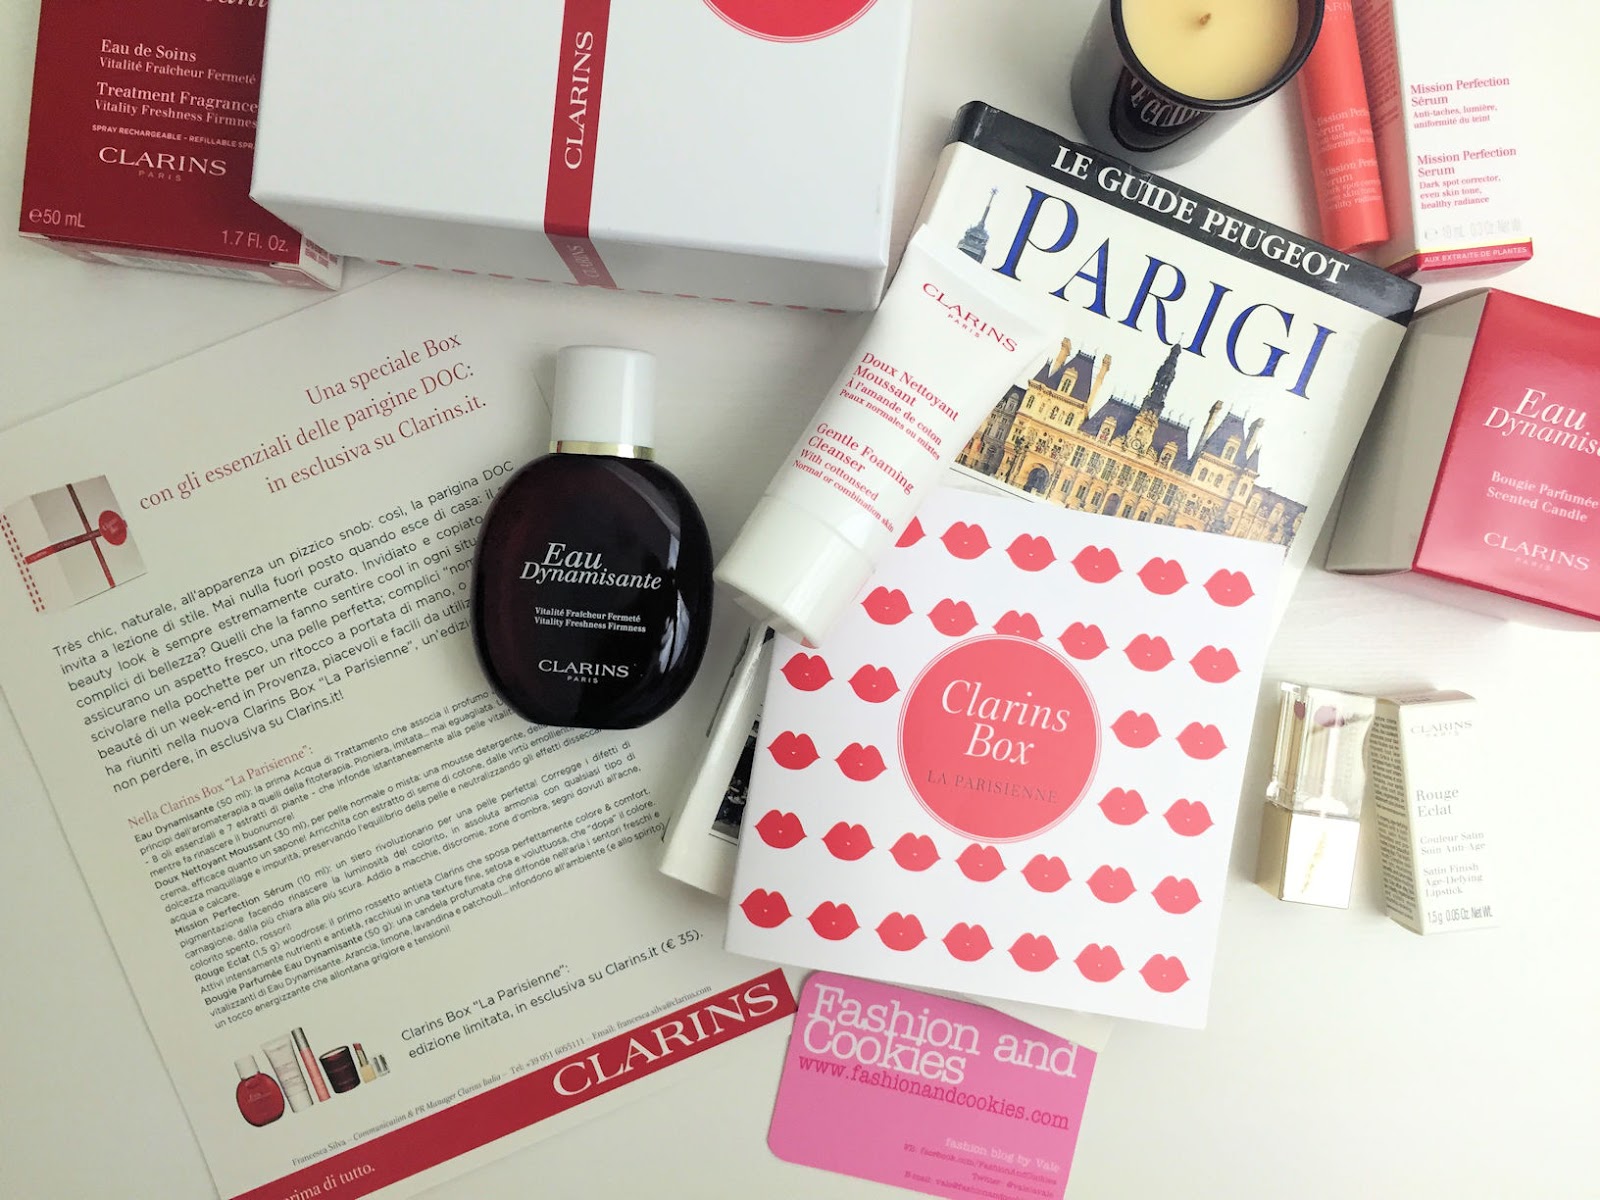 Clarins box La Parisienne on Fashion and Cookies beauty blog, beauty blogger